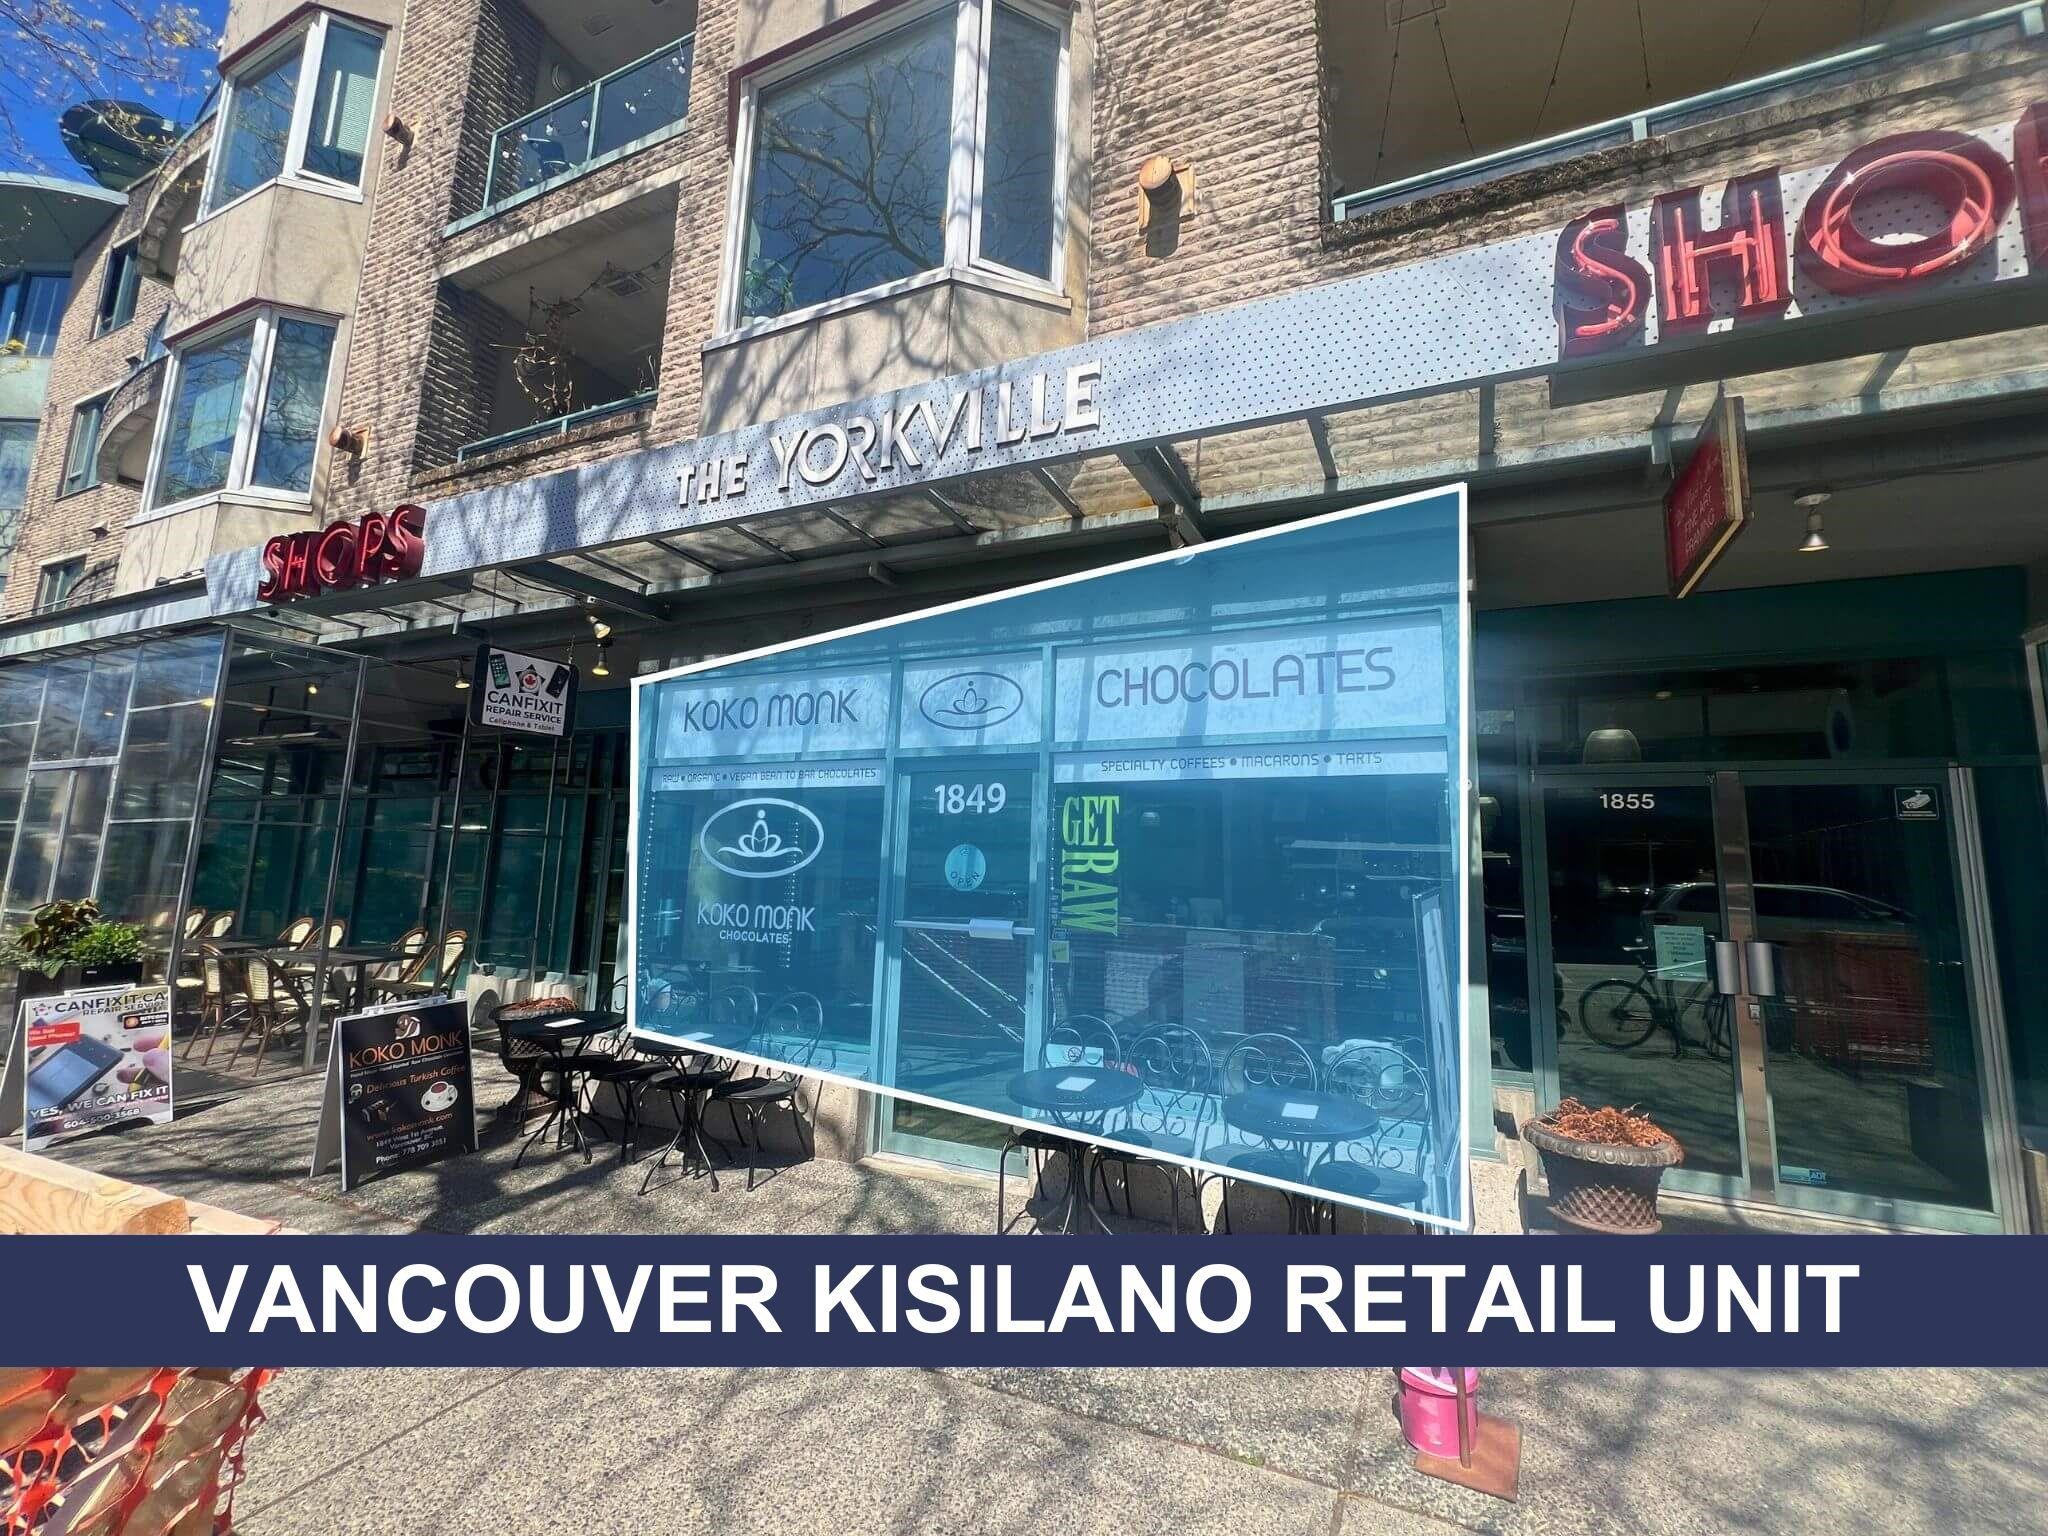 Kitsilano Land Commercial for sale:    (Listed 6800-05-18)